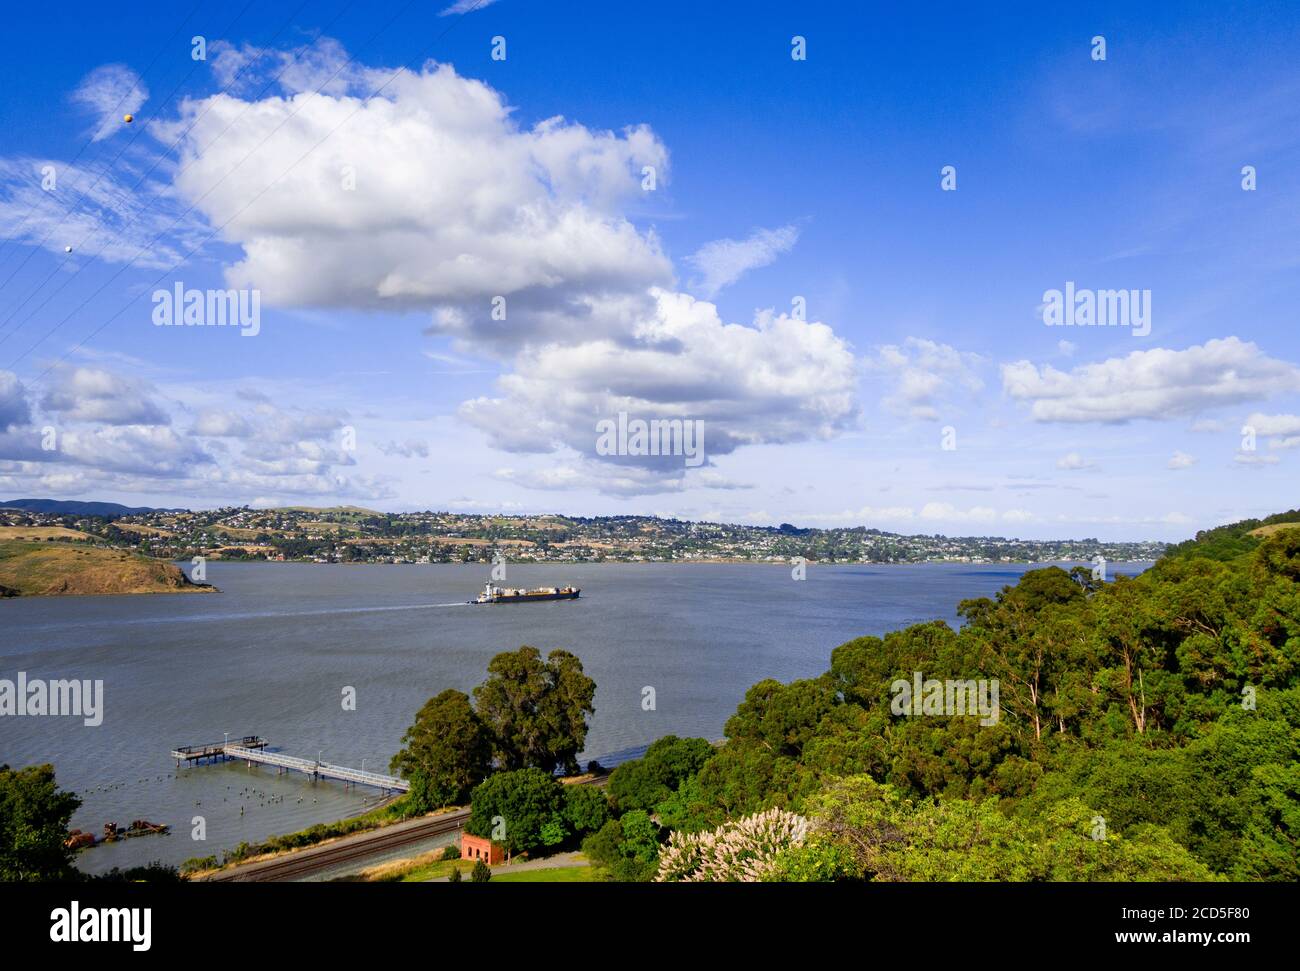 Distant view of container ship in Carquinez Strait, Vallejo, California, USA Stock Photo